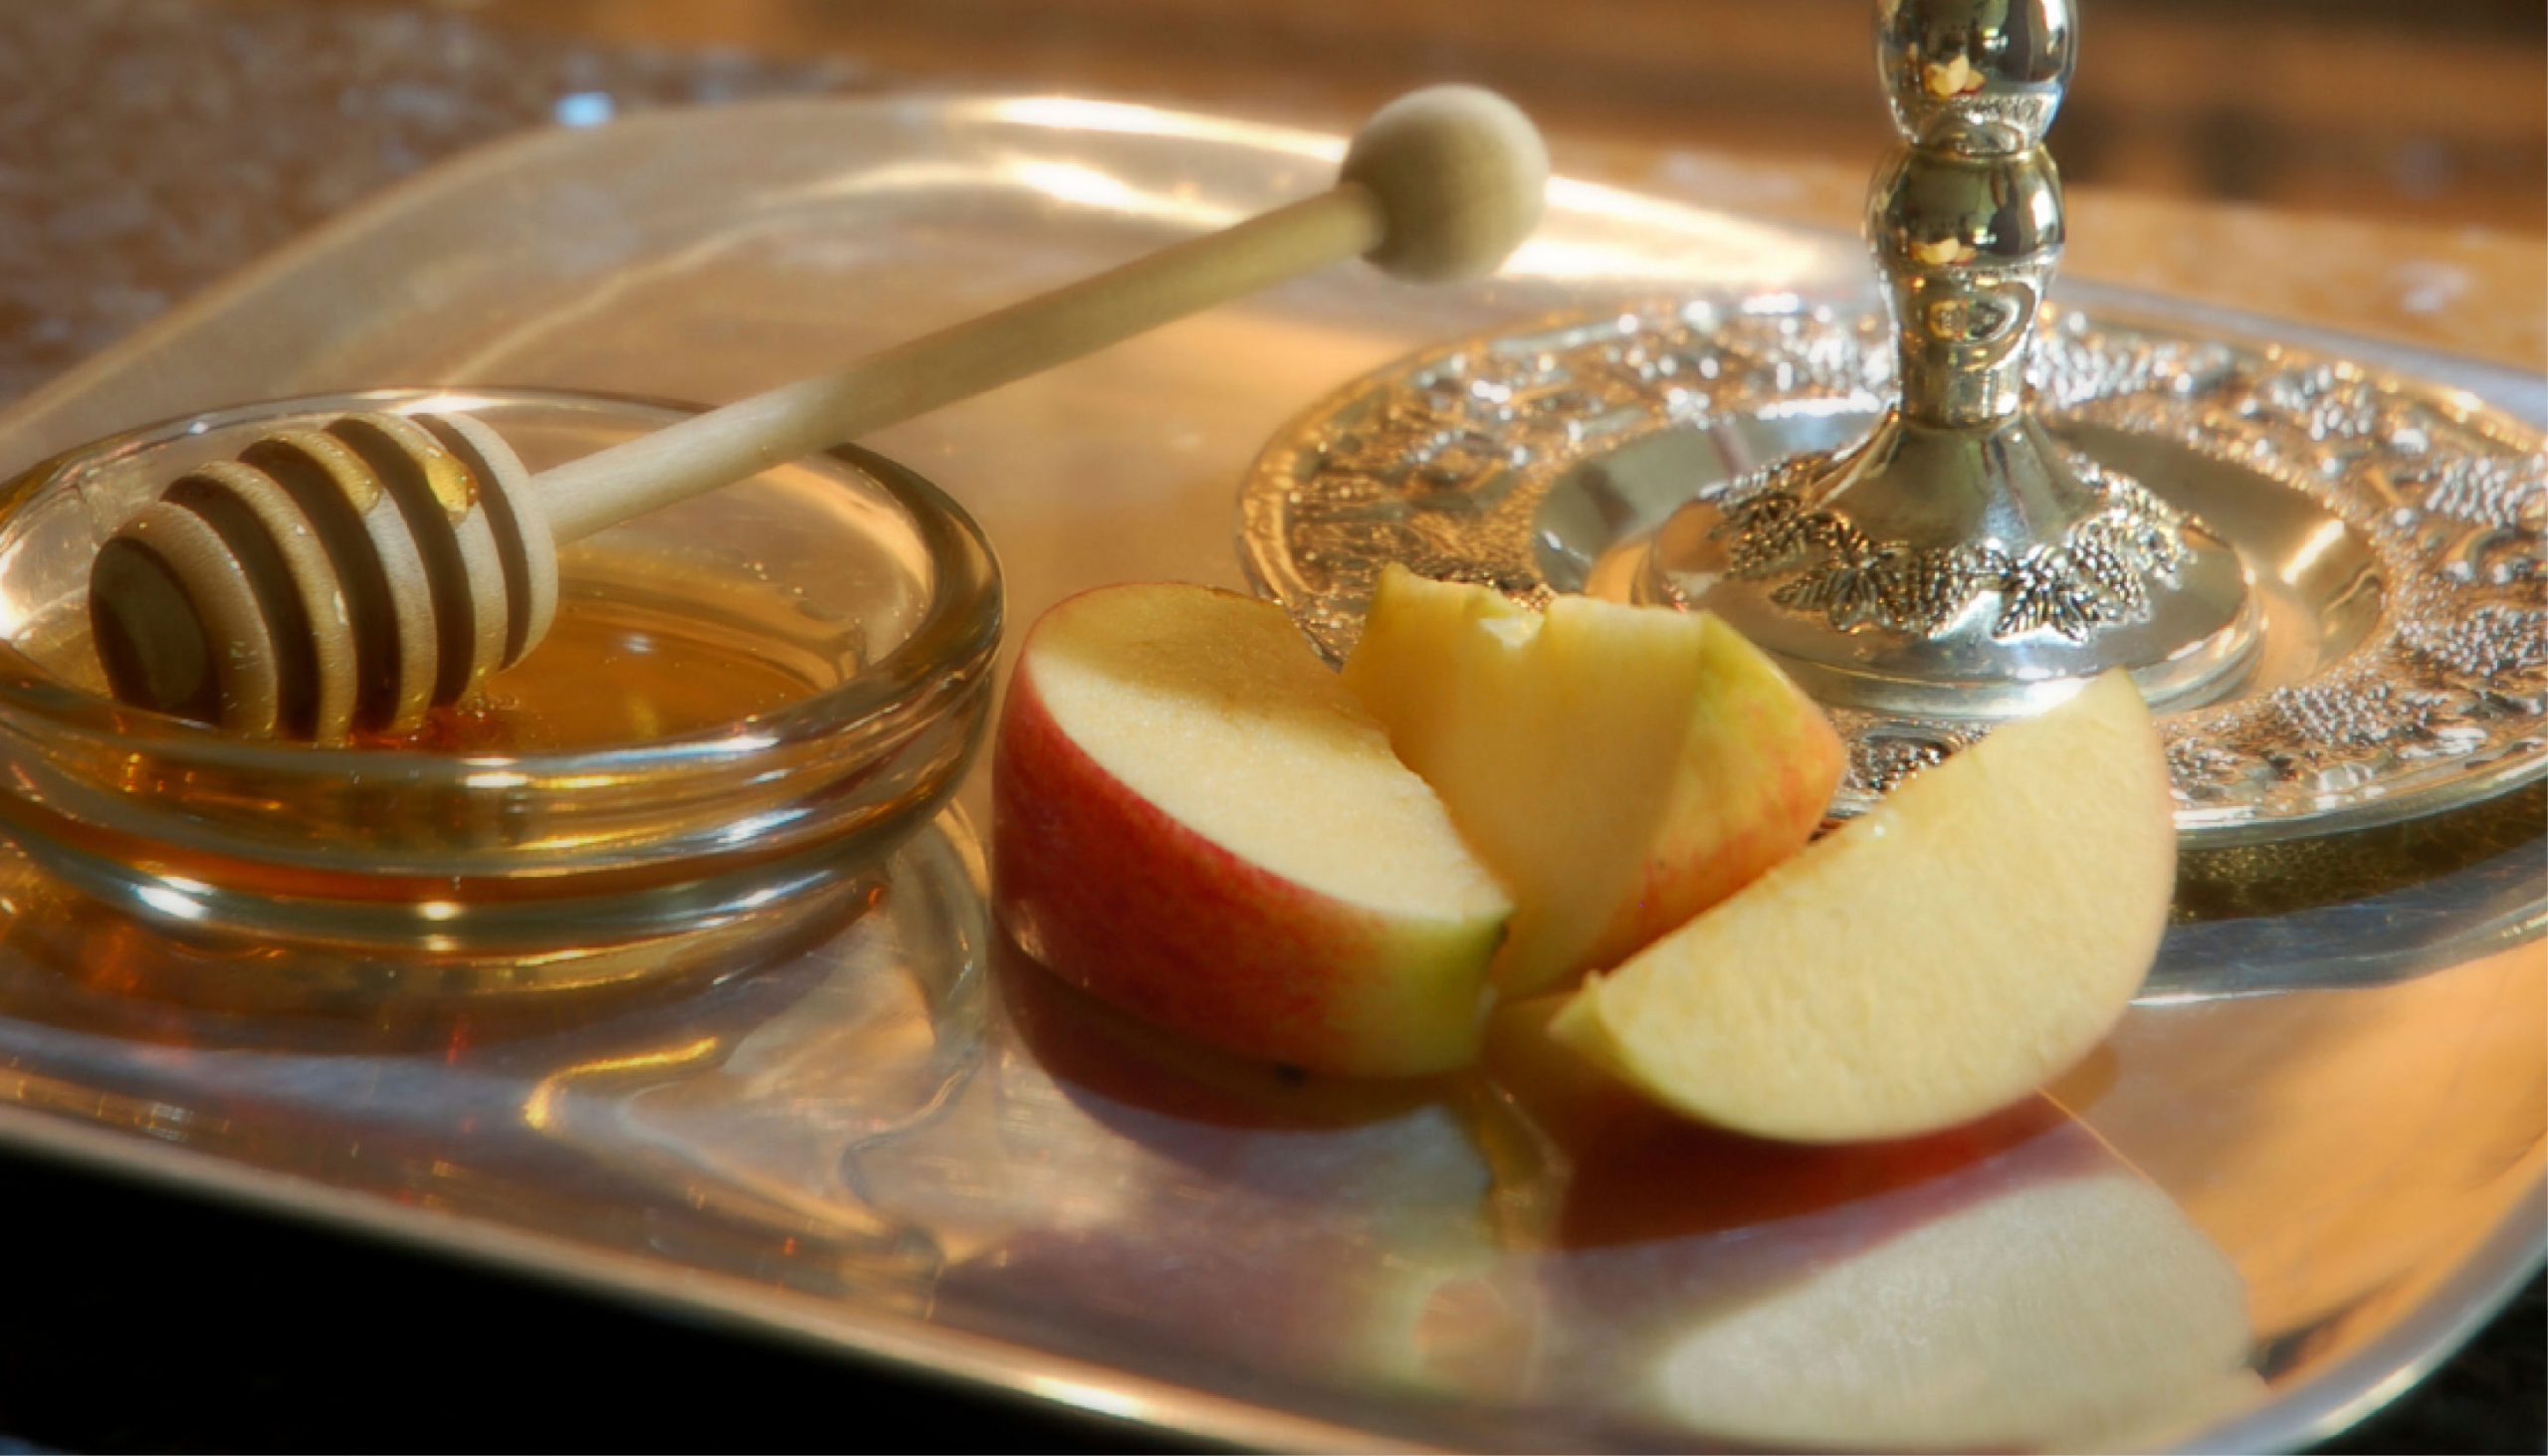 Rosh Hashanah: 5 things to know about the Jewish New Year